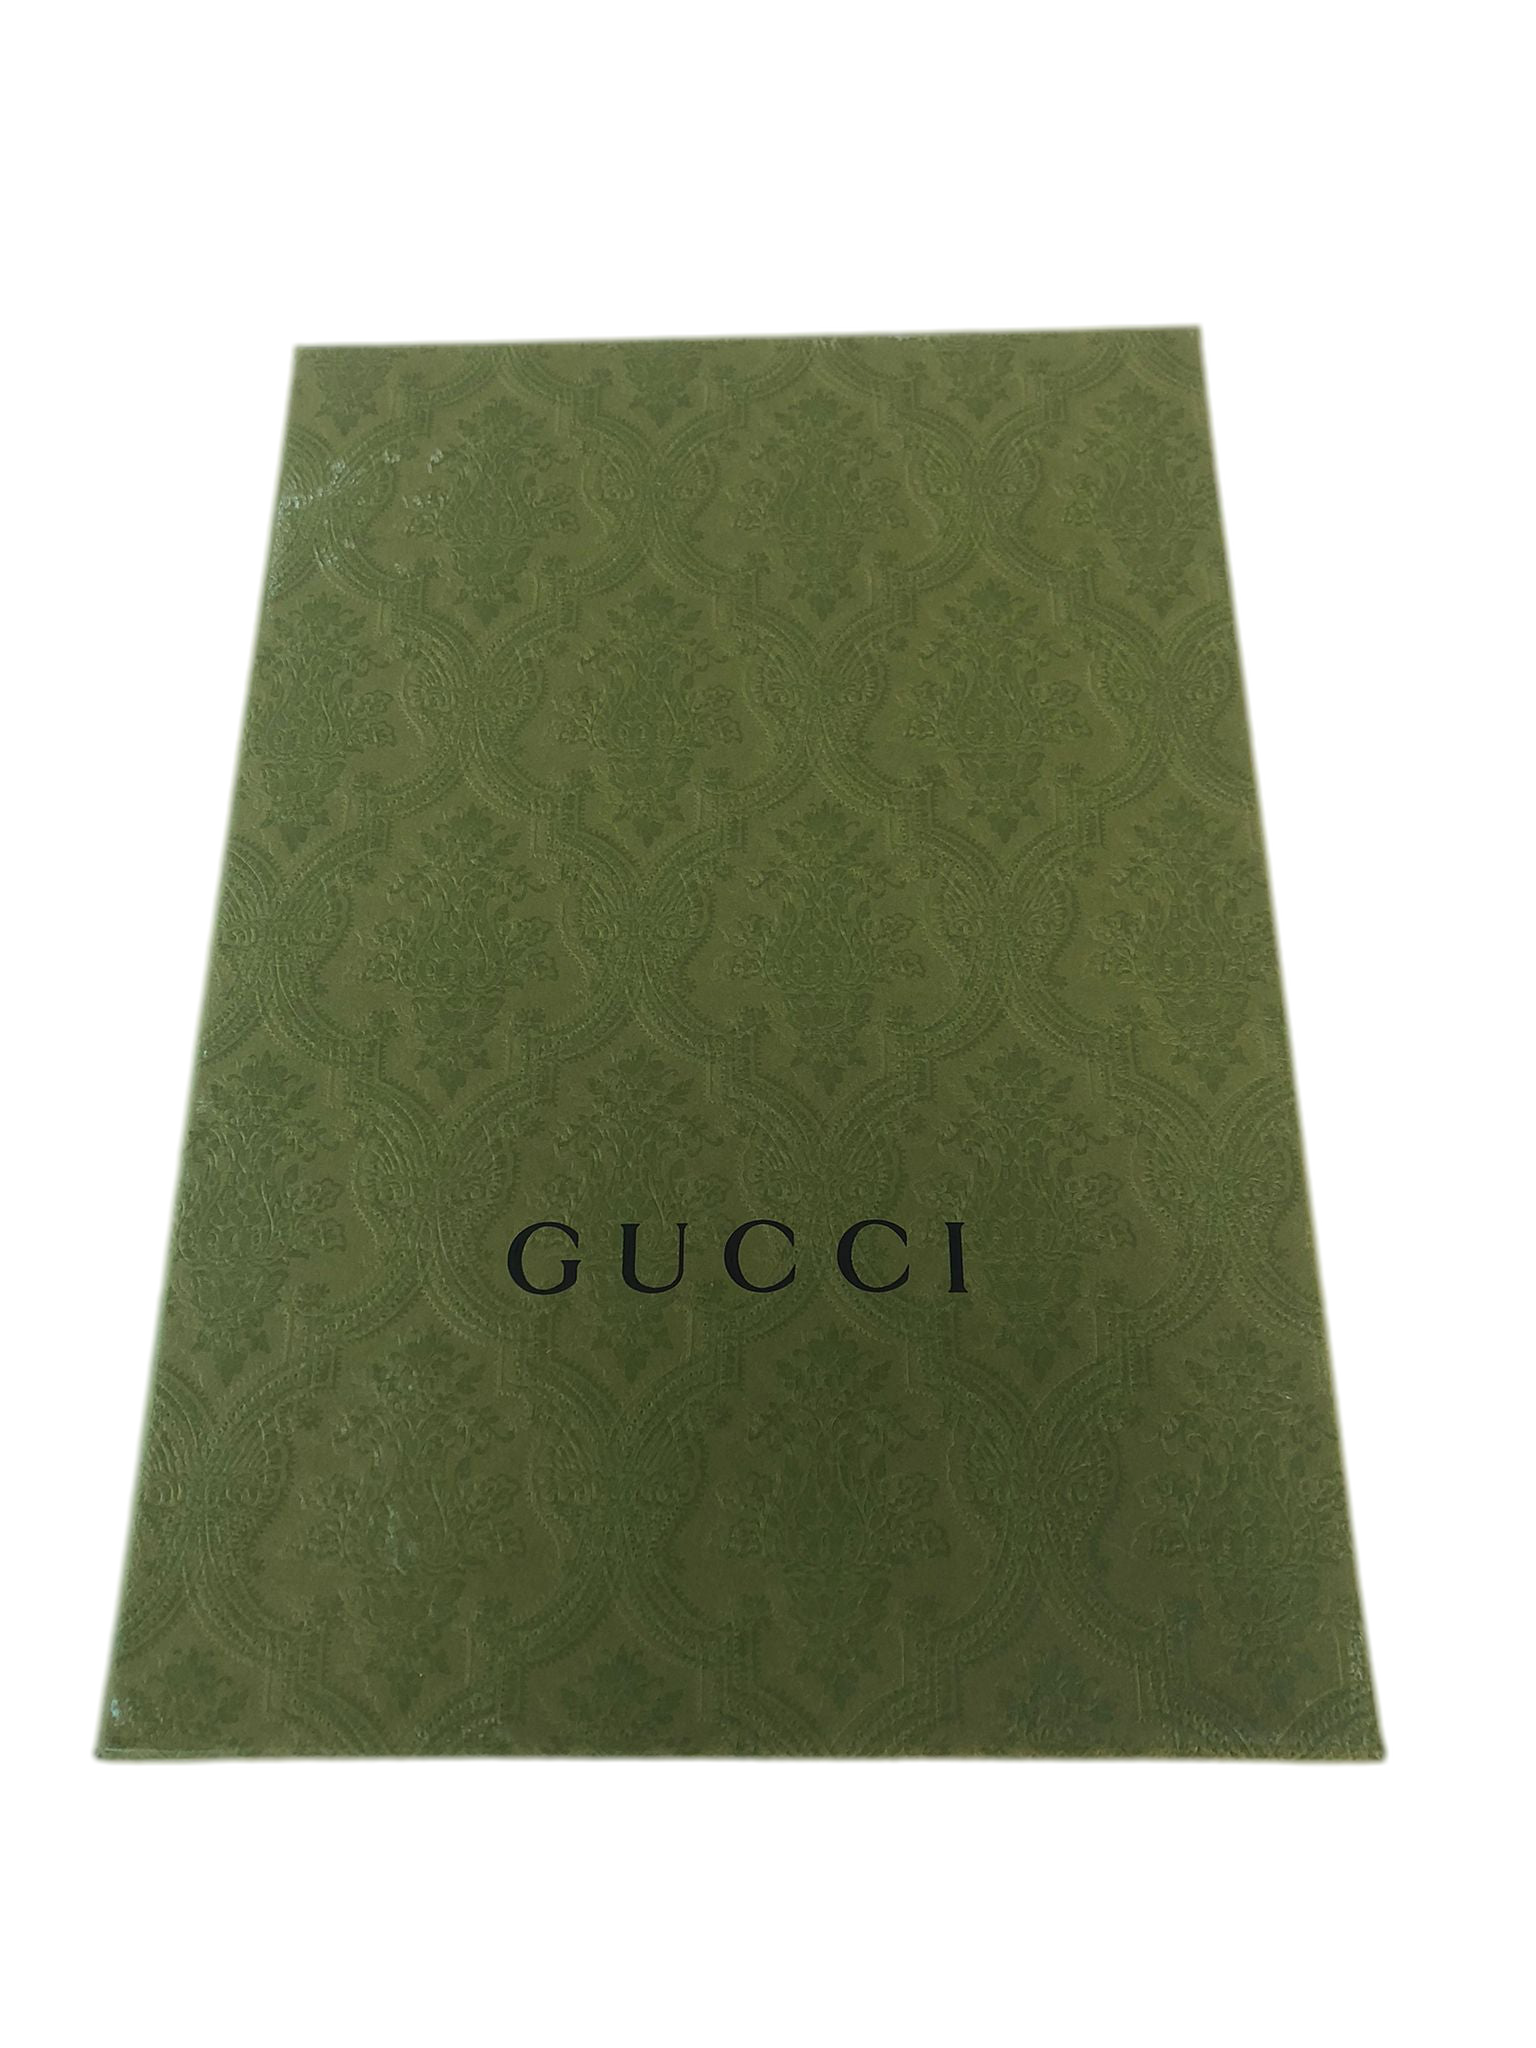 Authentic Gucci green gift box Ribbon Tissue Set (ideal for clothes & scarf)